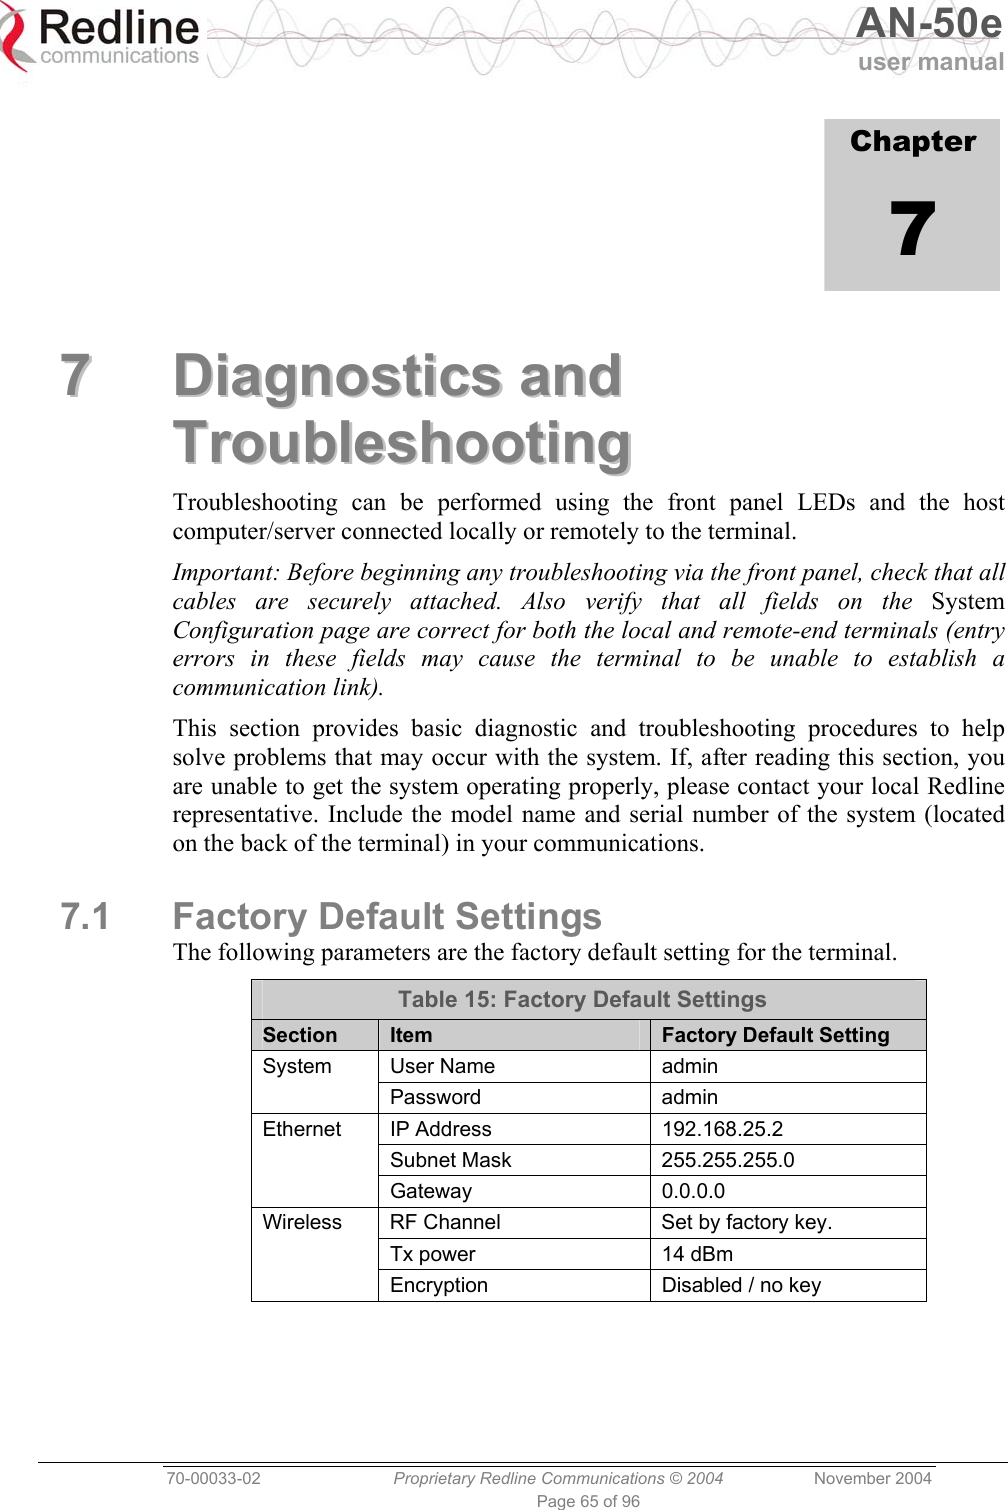   AN-50e user manual  70-00033-02  Proprietary Redline Communications © 2004 November 2004 Page 65 of 96             Chapter 7 77  DDiiaaggnnoossttiiccss  aanndd  TTrroouubblleesshhoooottiinngg  Troubleshooting can be performed using the front panel LEDs and the host computer/server connected locally or remotely to the terminal. Important: Before beginning any troubleshooting via the front panel, check that all cables are securely attached. Also verify that all fields on the System Configuration page are correct for both the local and remote-end terminals (entry errors in these fields may cause the terminal to be unable to establish a communication link). This section provides basic diagnostic and troubleshooting procedures to help solve problems that may occur with the system. If, after reading this section, you are unable to get the system operating properly, please contact your local Redline representative. Include the model name and serial number of the system (located on the back of the terminal) in your communications. 7.1  Factory Default Settings The following parameters are the factory default setting for the terminal. Table 15: Factory Default Settings Section  Item  Factory Default Setting System User Name  admin  Password   admin Ethernet  IP Address   192.168.25.2  Subnet Mask   255.255.255.0  Gateway   0.0.0.0 Wireless  RF Channel  Set by factory key.   Tx power   14 dBm   Encryption   Disabled / no key  